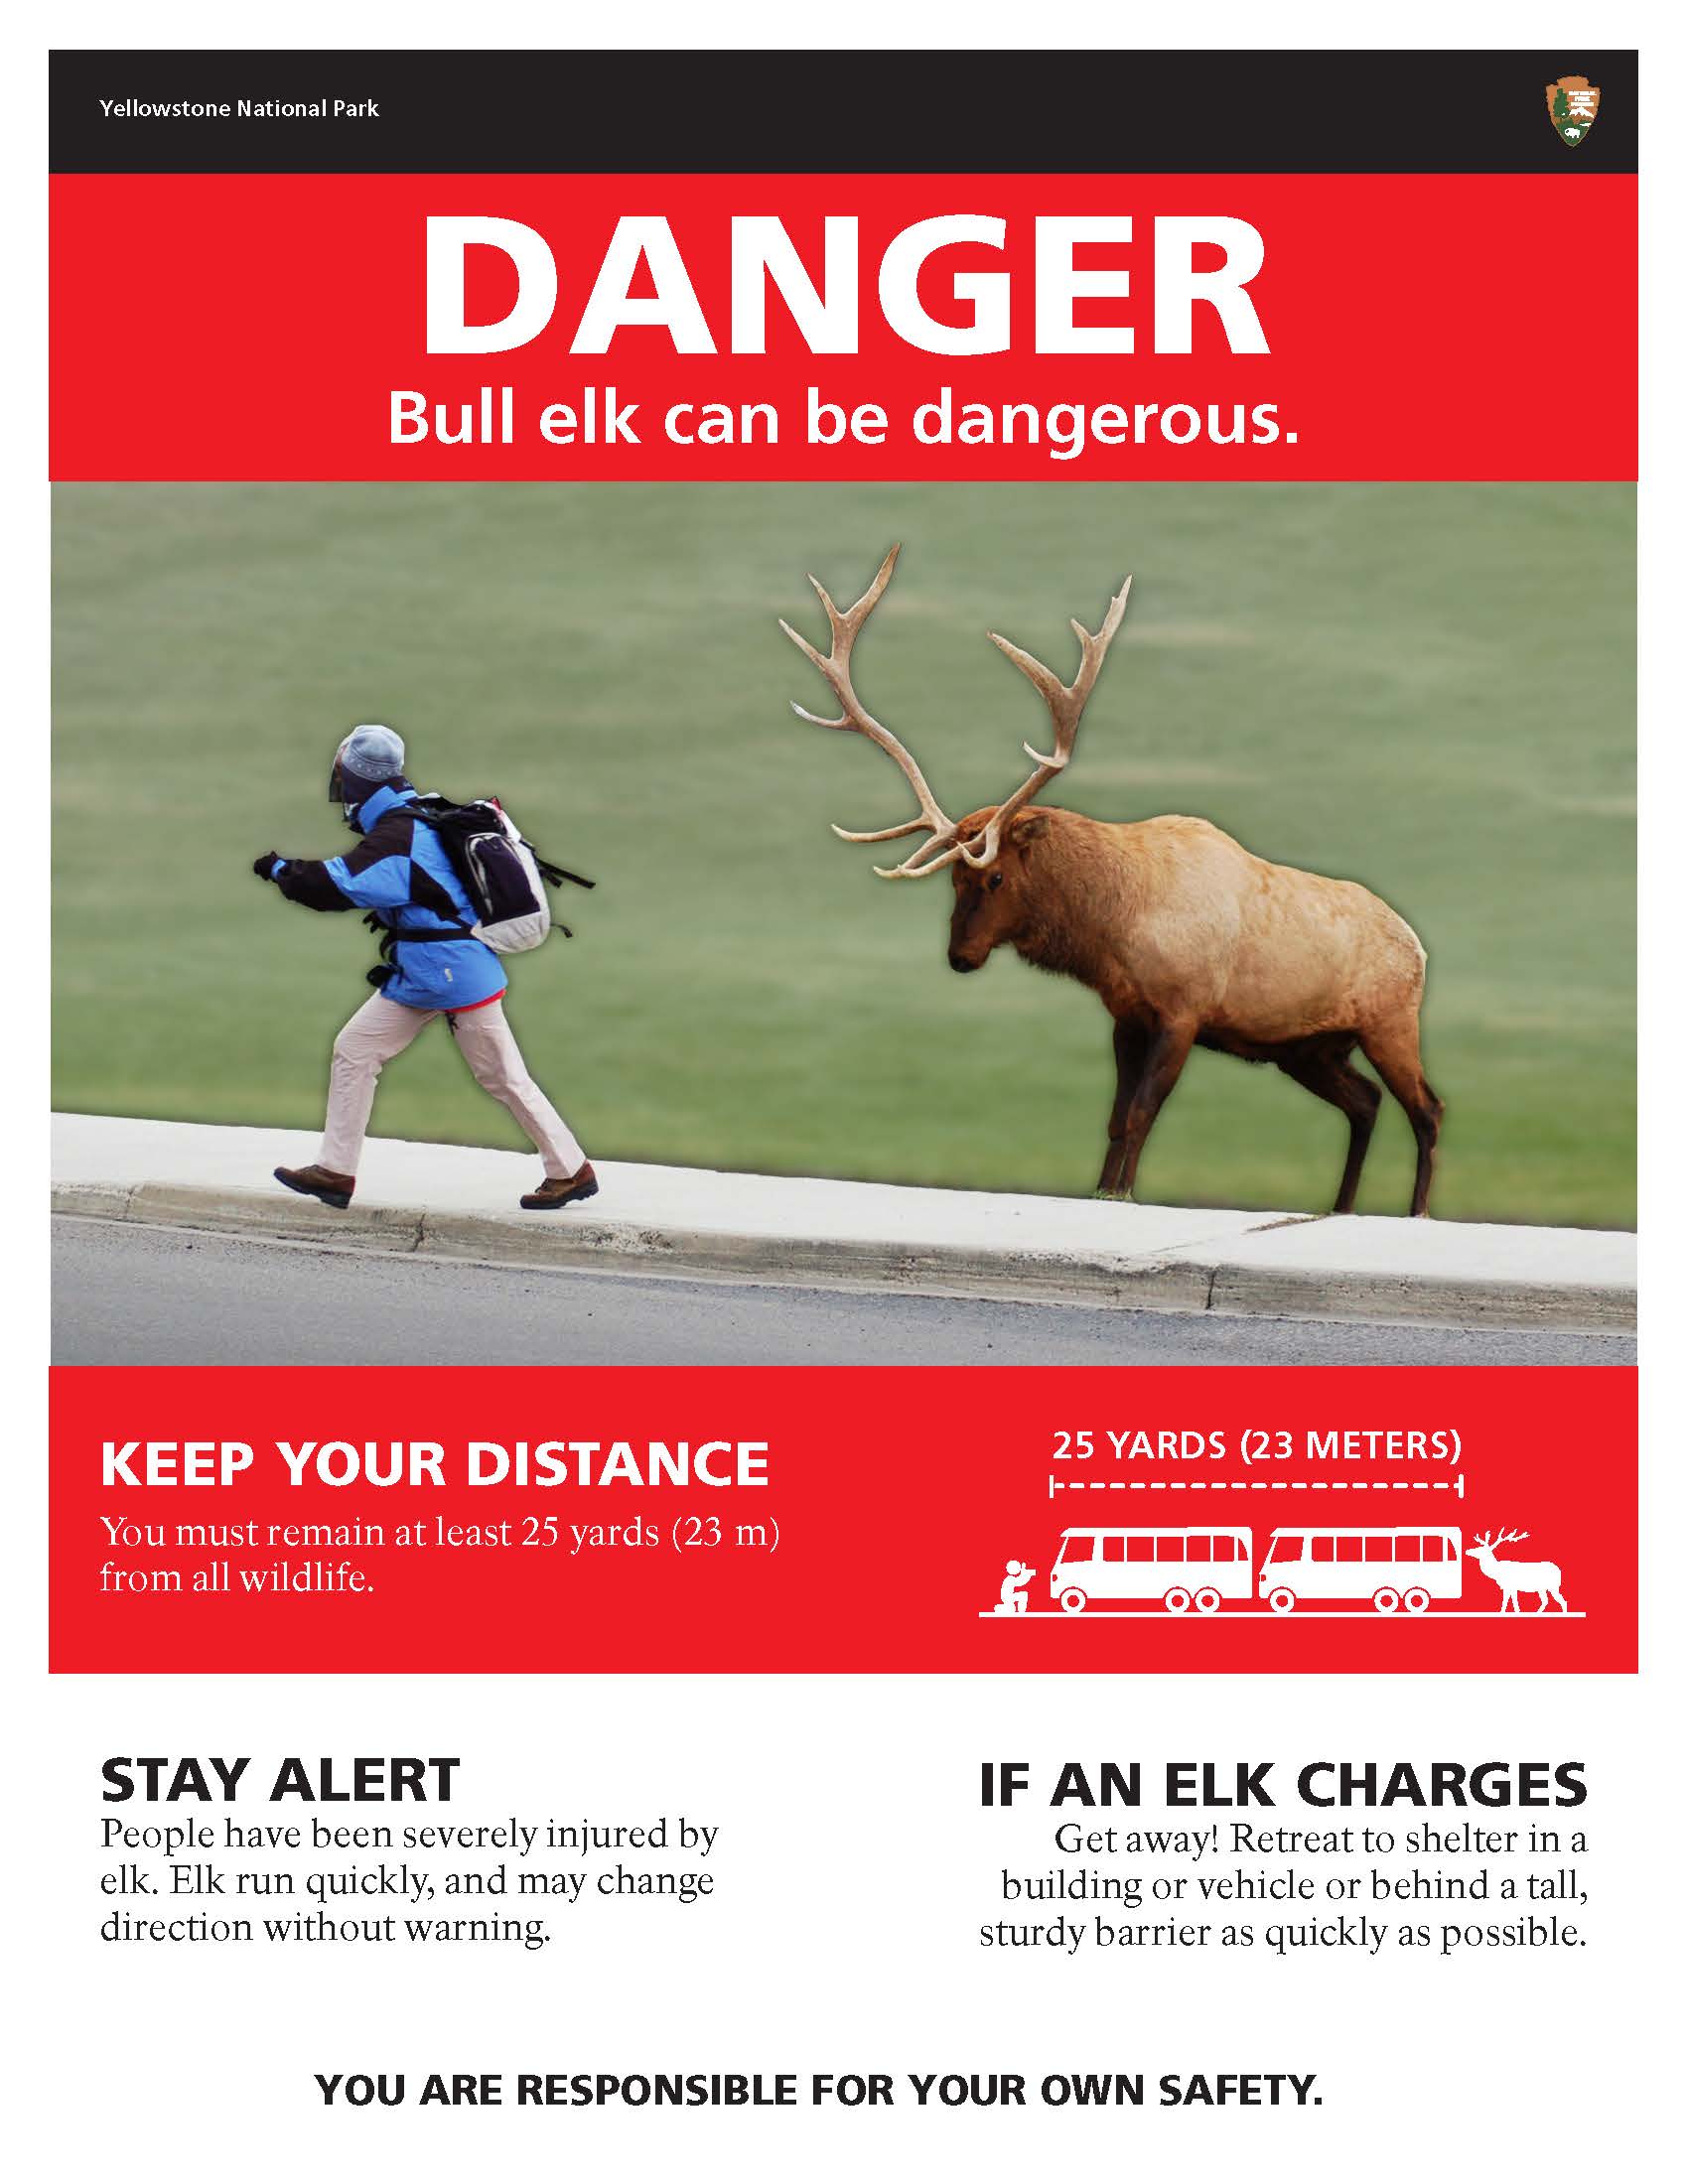 poster of elk charger visitor with safety messages